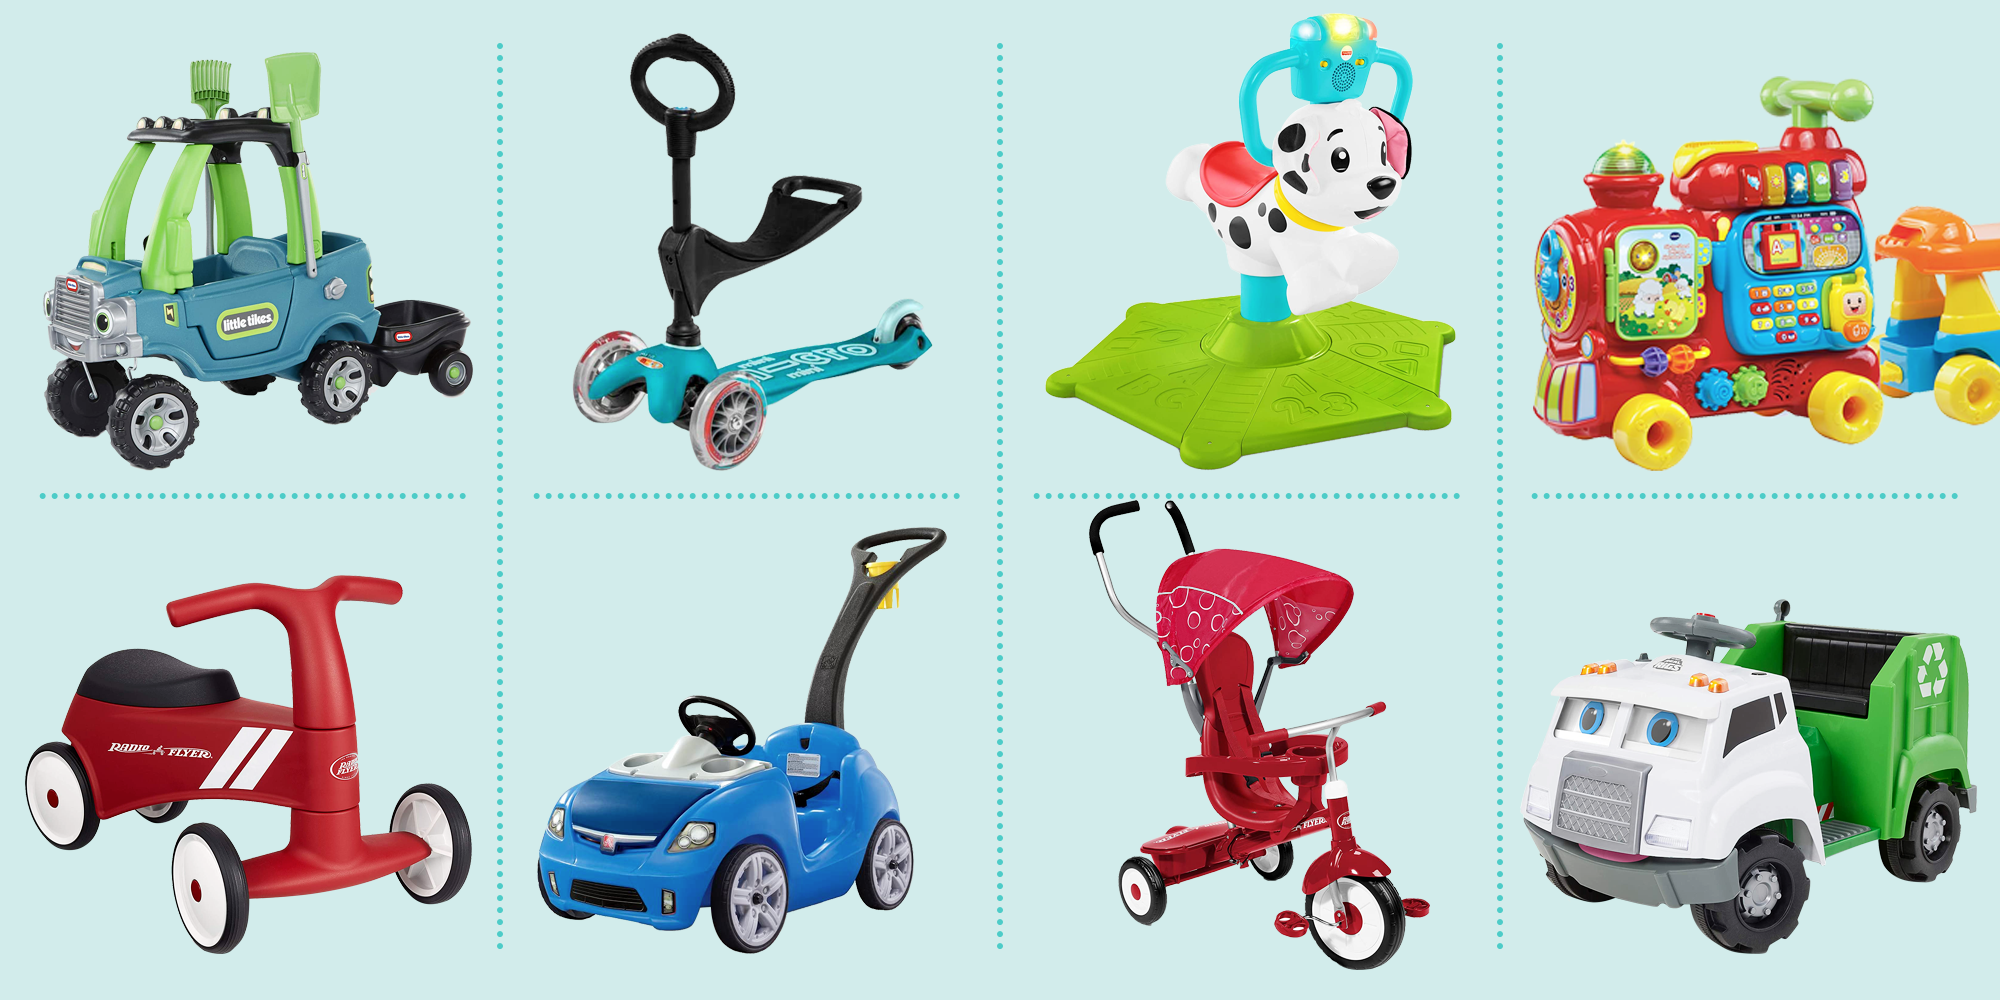 Ride On Toys For Kids And Toddlers